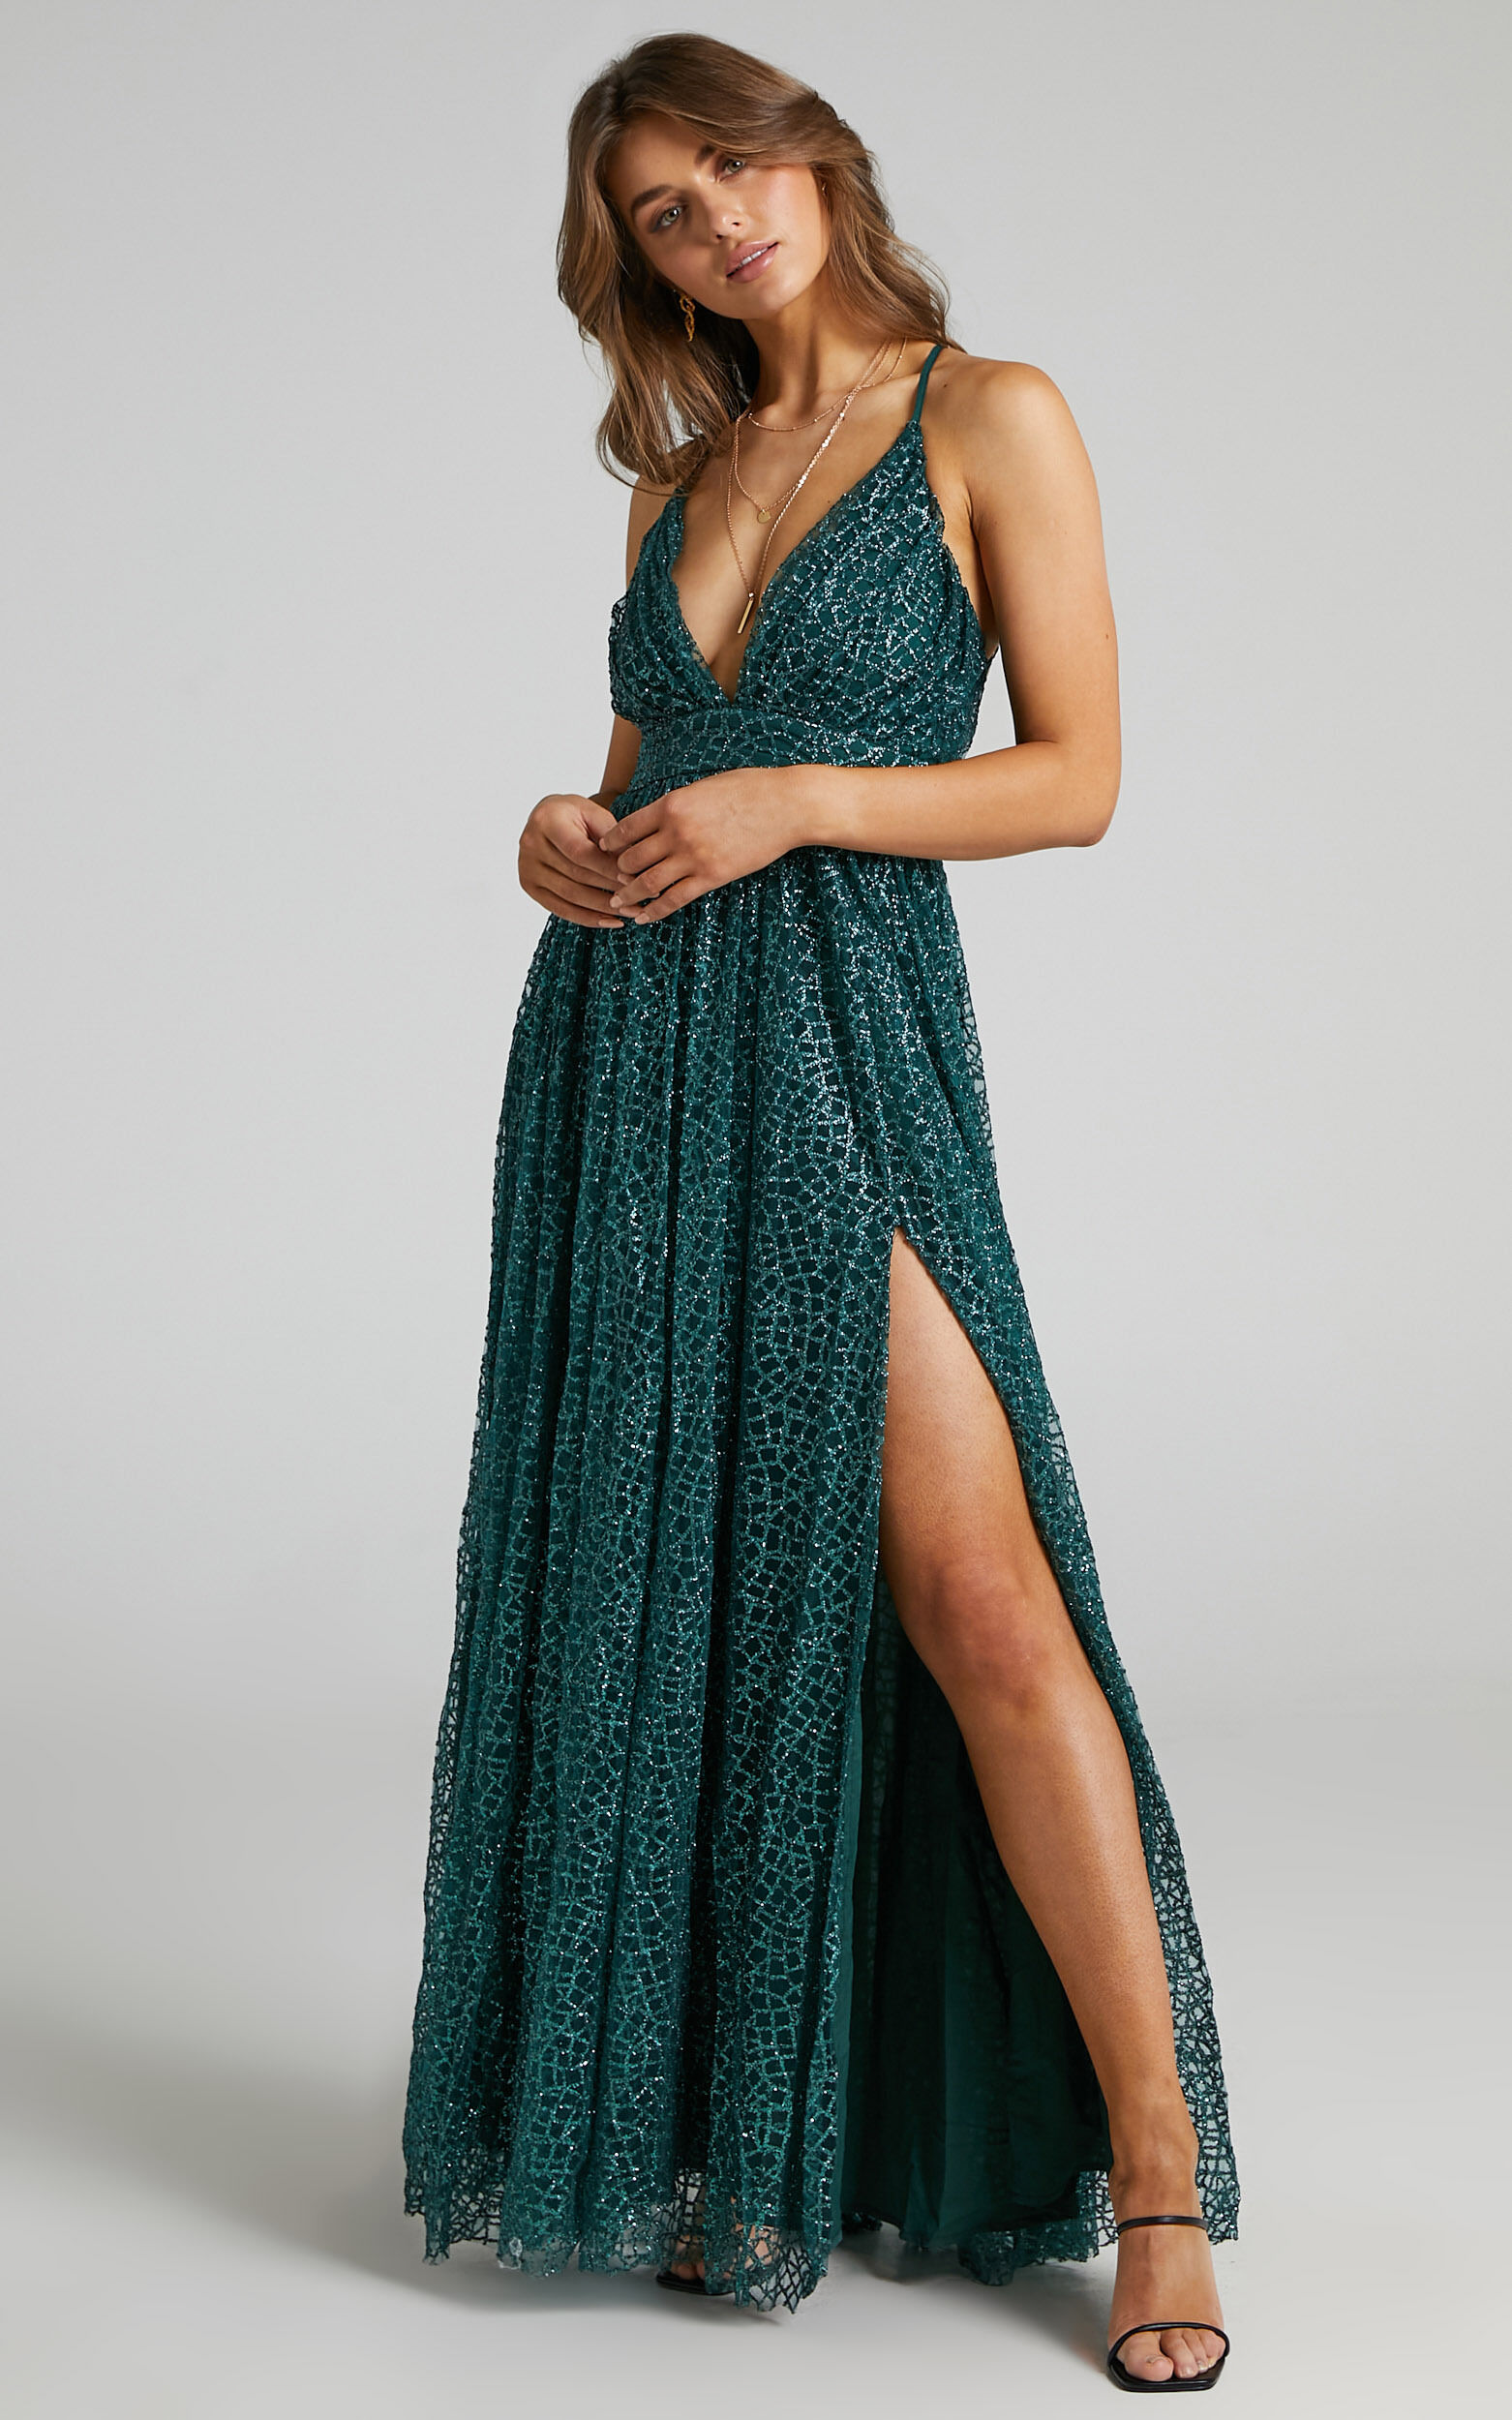 Lady Godiva Dress in Emerald Glitter Tulle - 06, GRN2, super-hi-res image number null